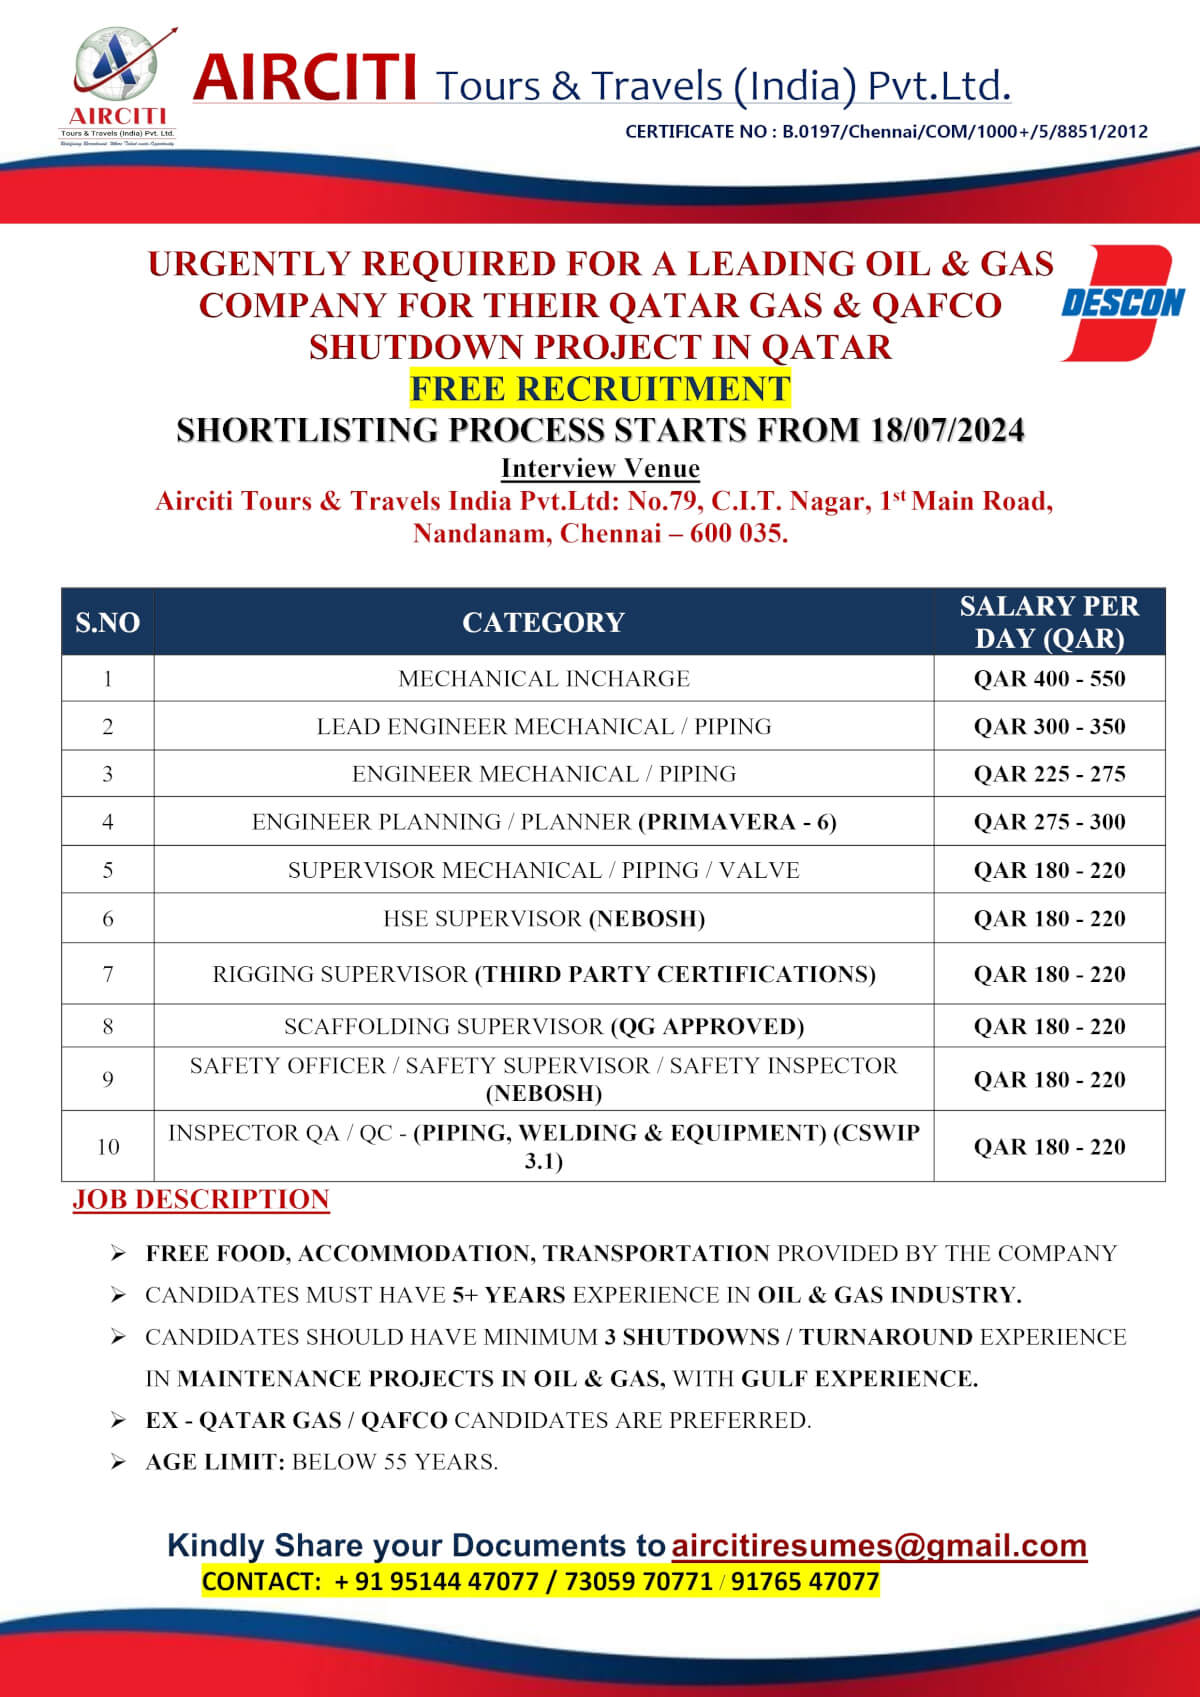 Urgently Required for Qatar gas & Qafco (Descon) Project